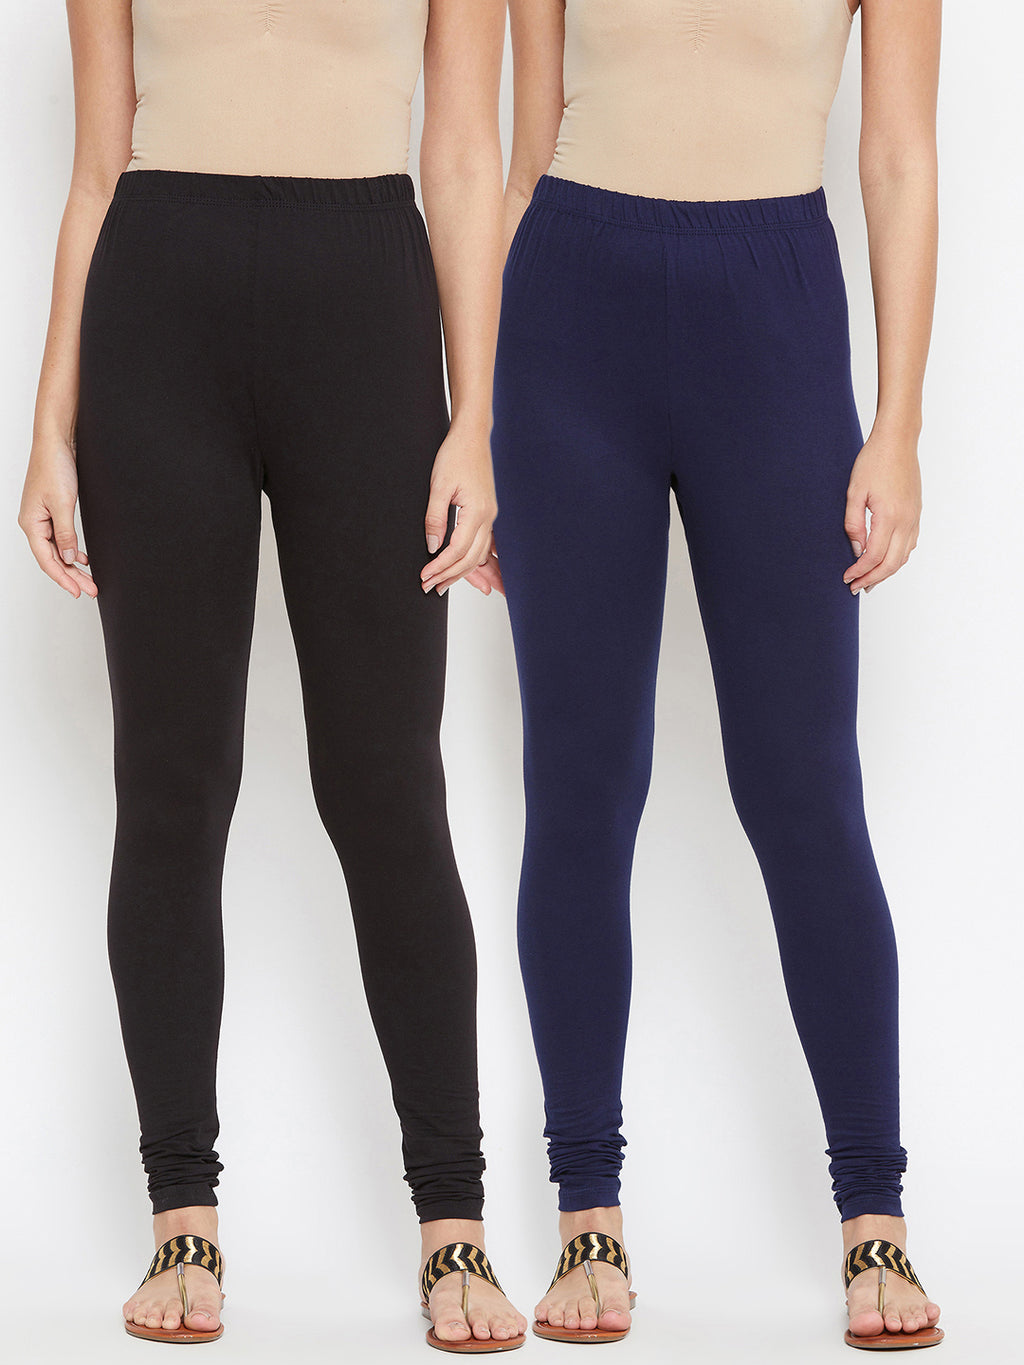 Gym Leggings and Bottoms | Oner Active UK